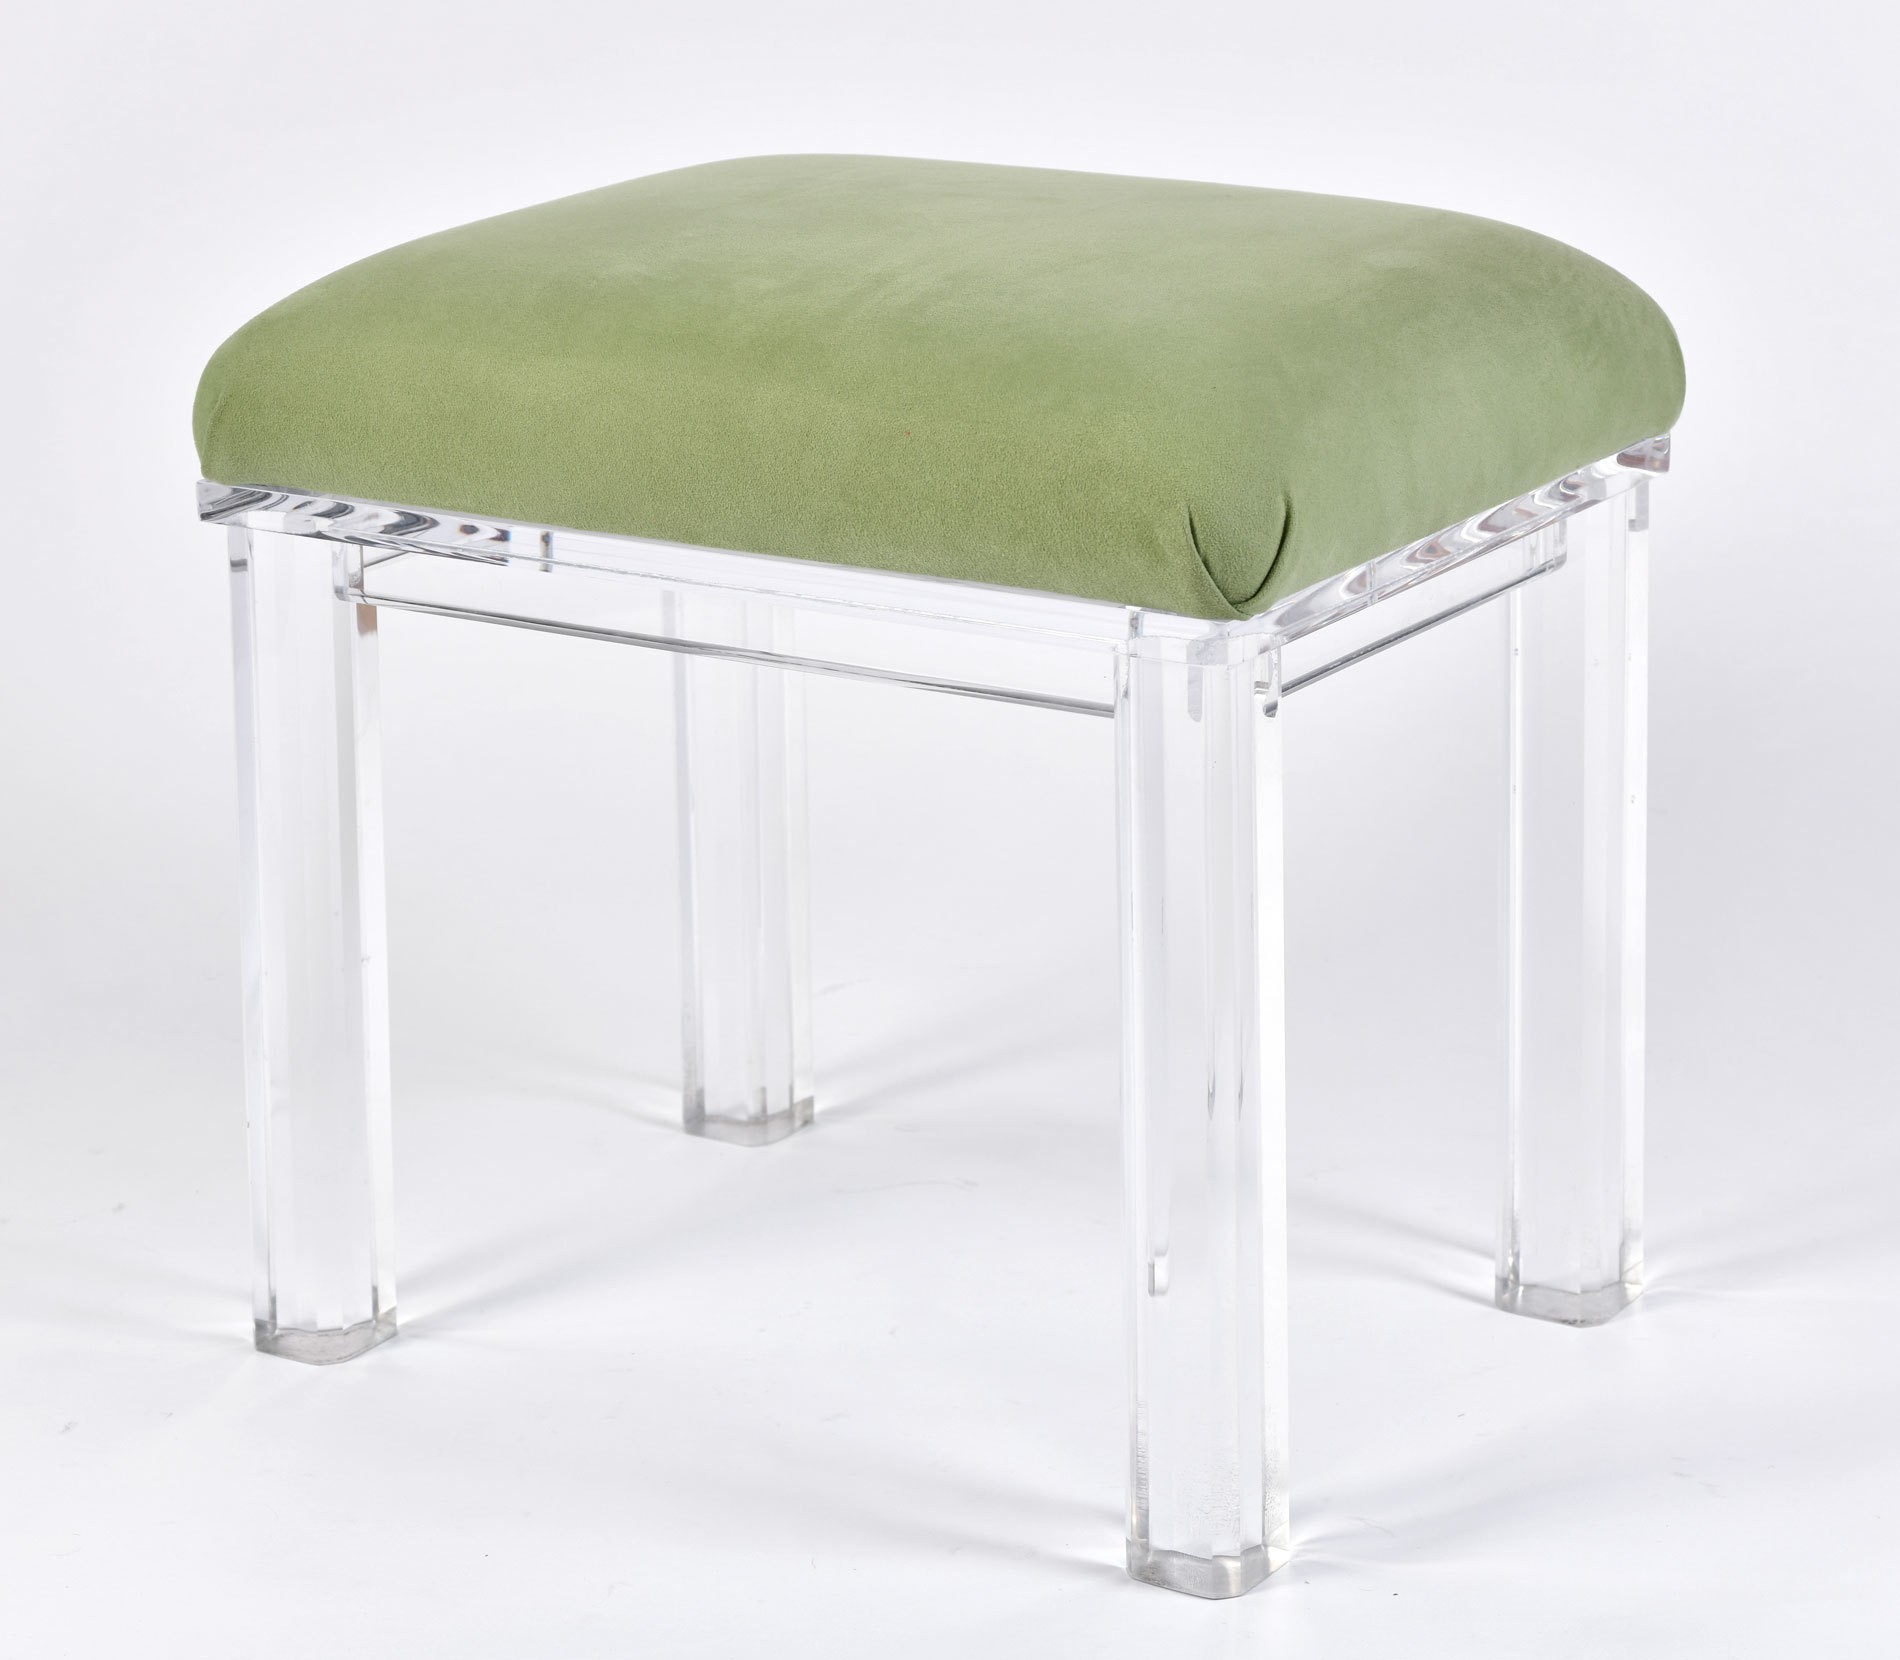 American lucite stool by carmichael valerie wade